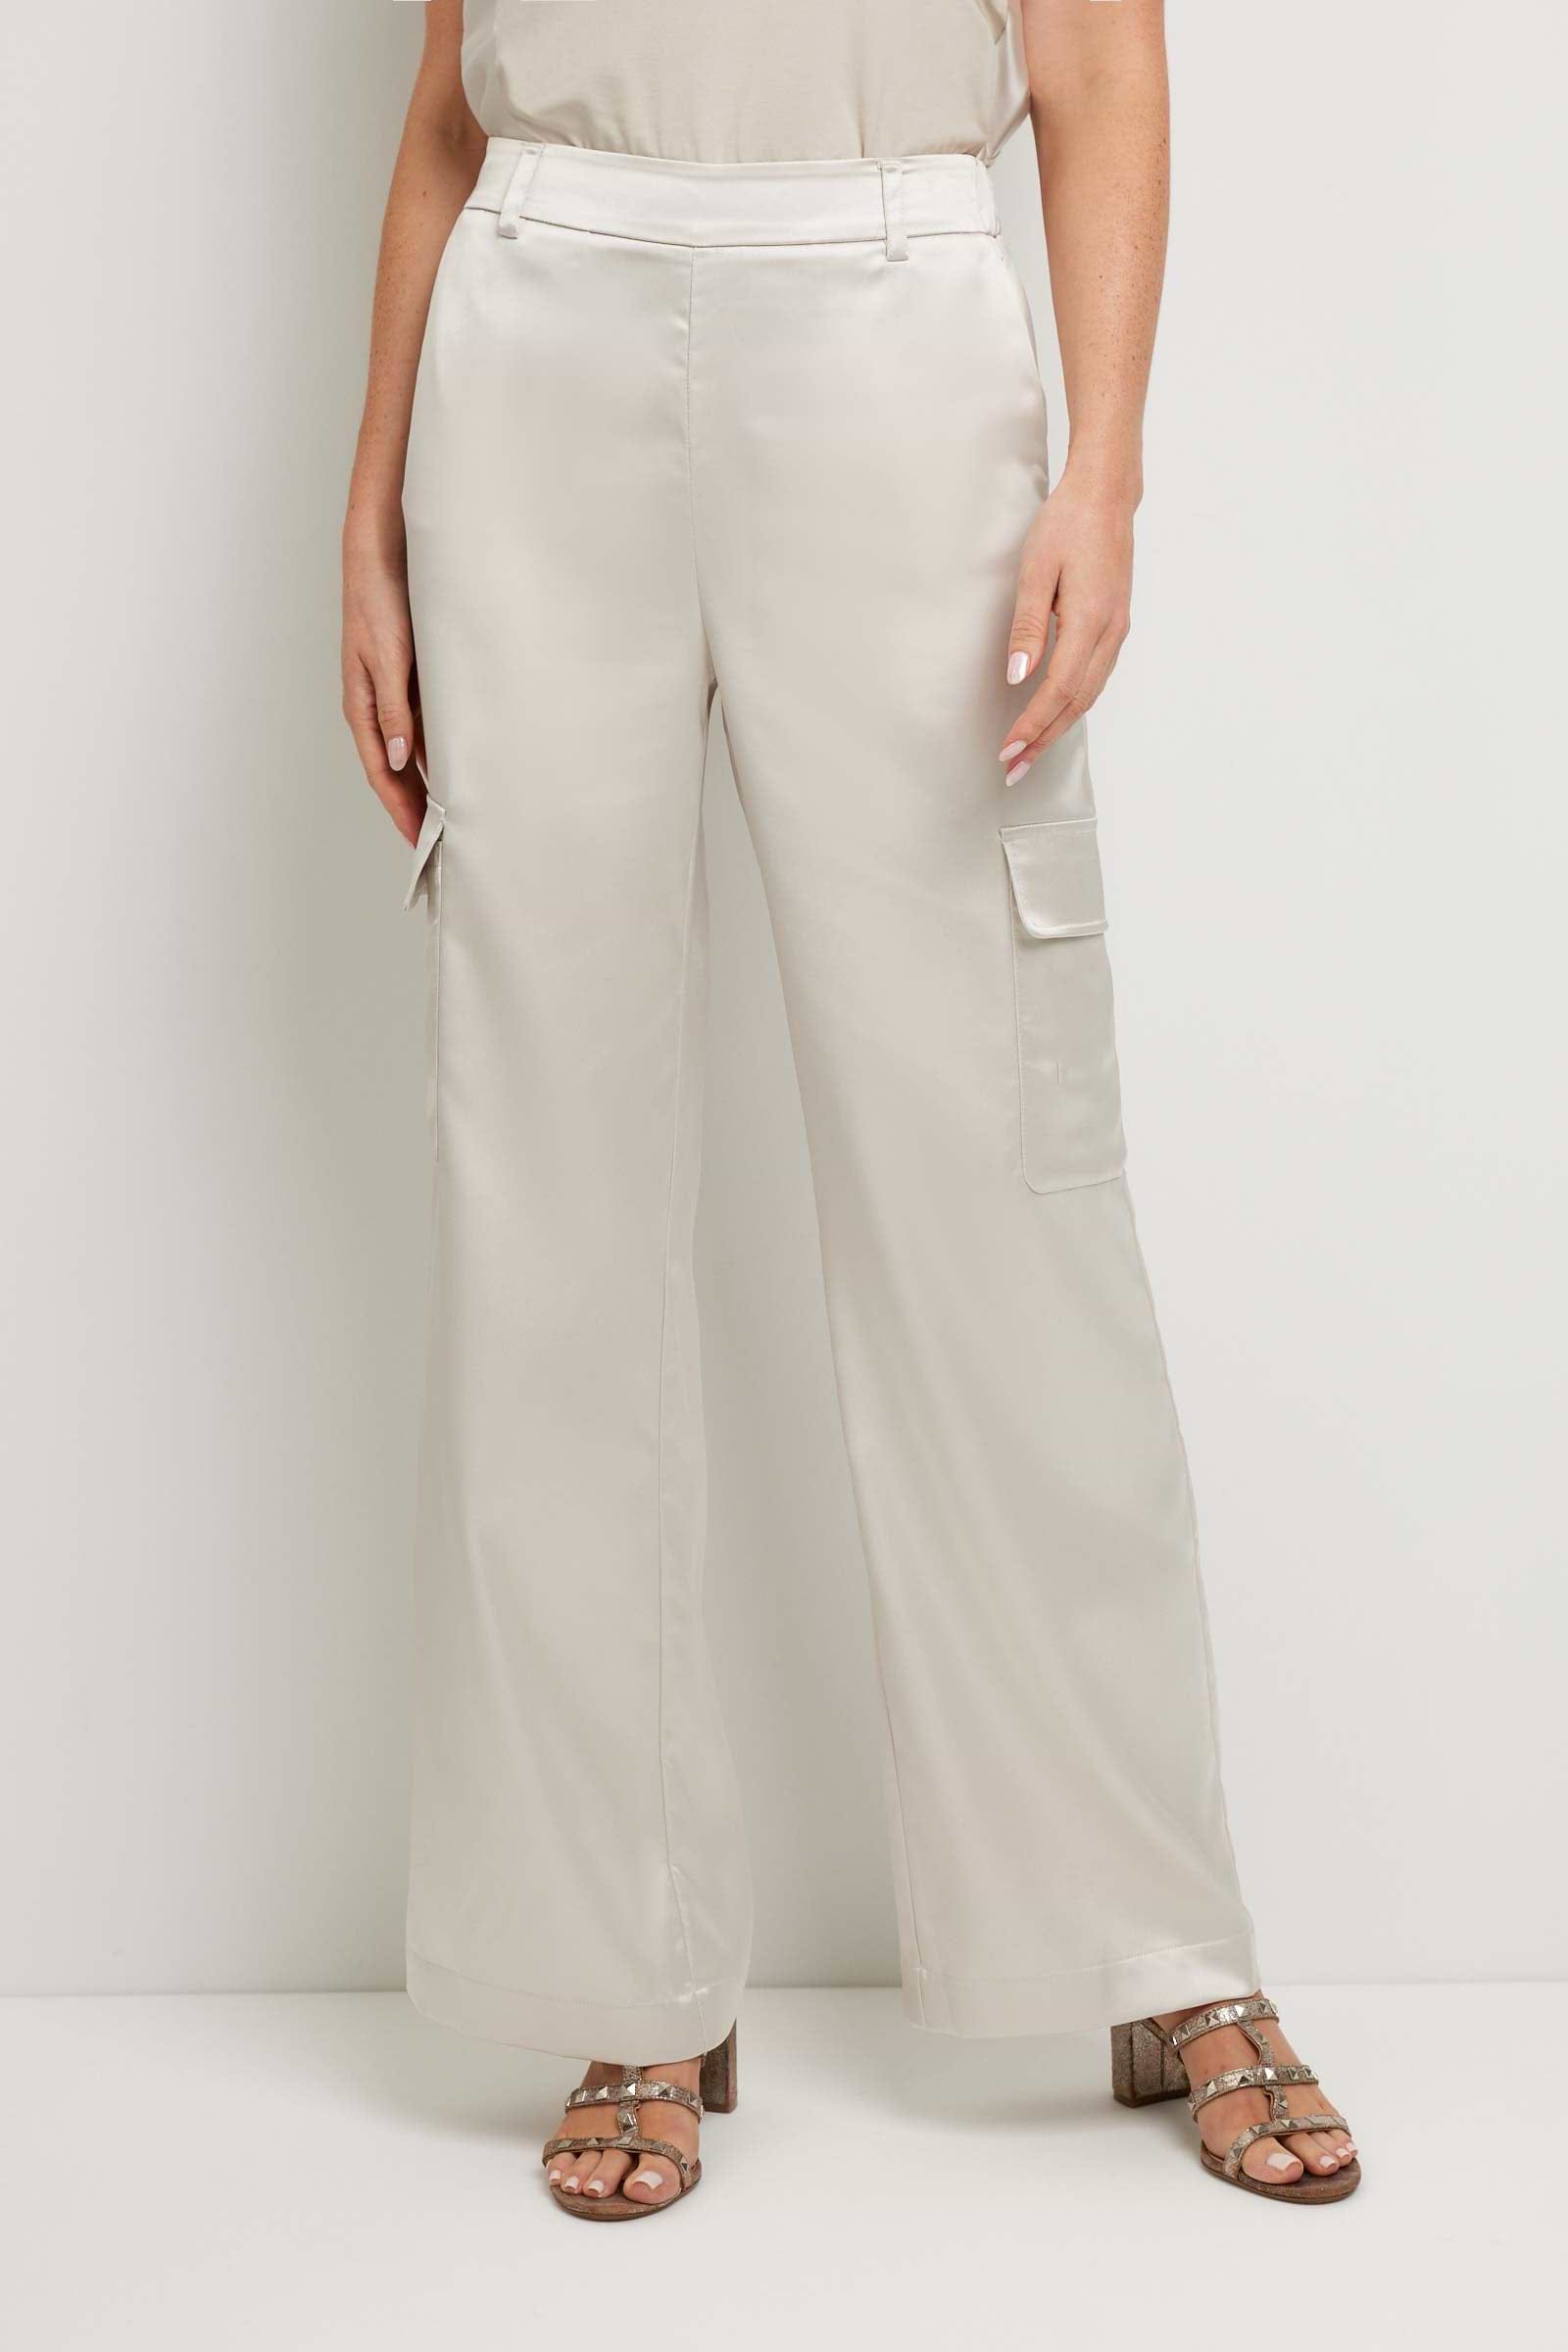 The Best Travel Pant. Front Profile of a Candela Satin Pant in Stone.